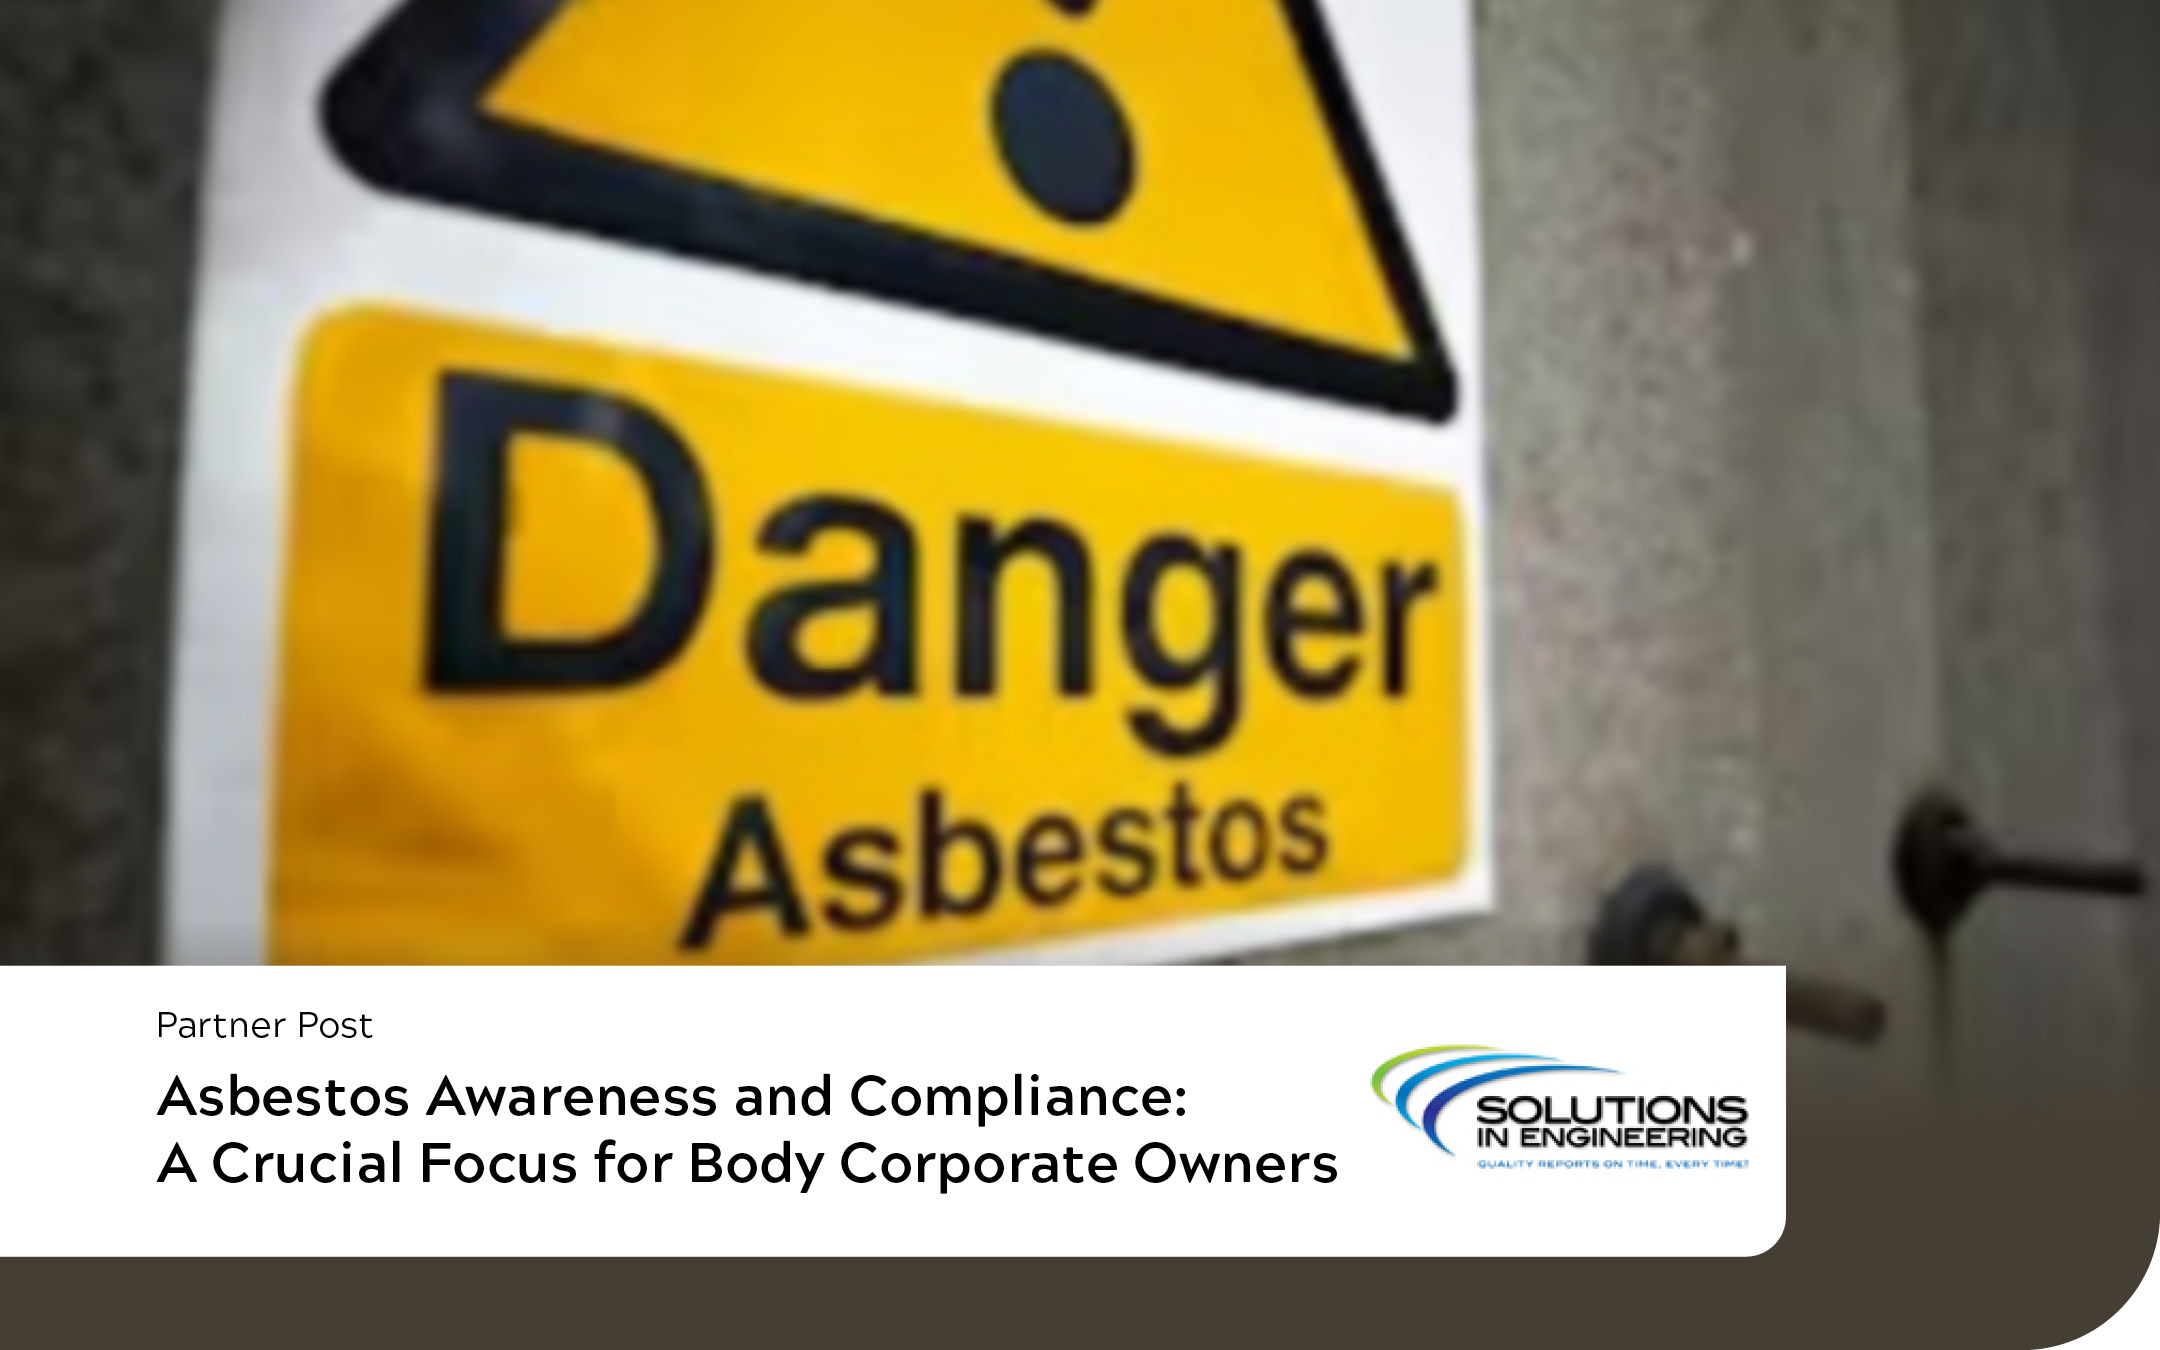 Asbestos Awareness and Compliance: A Crucial Focus for Body Corporate Owners